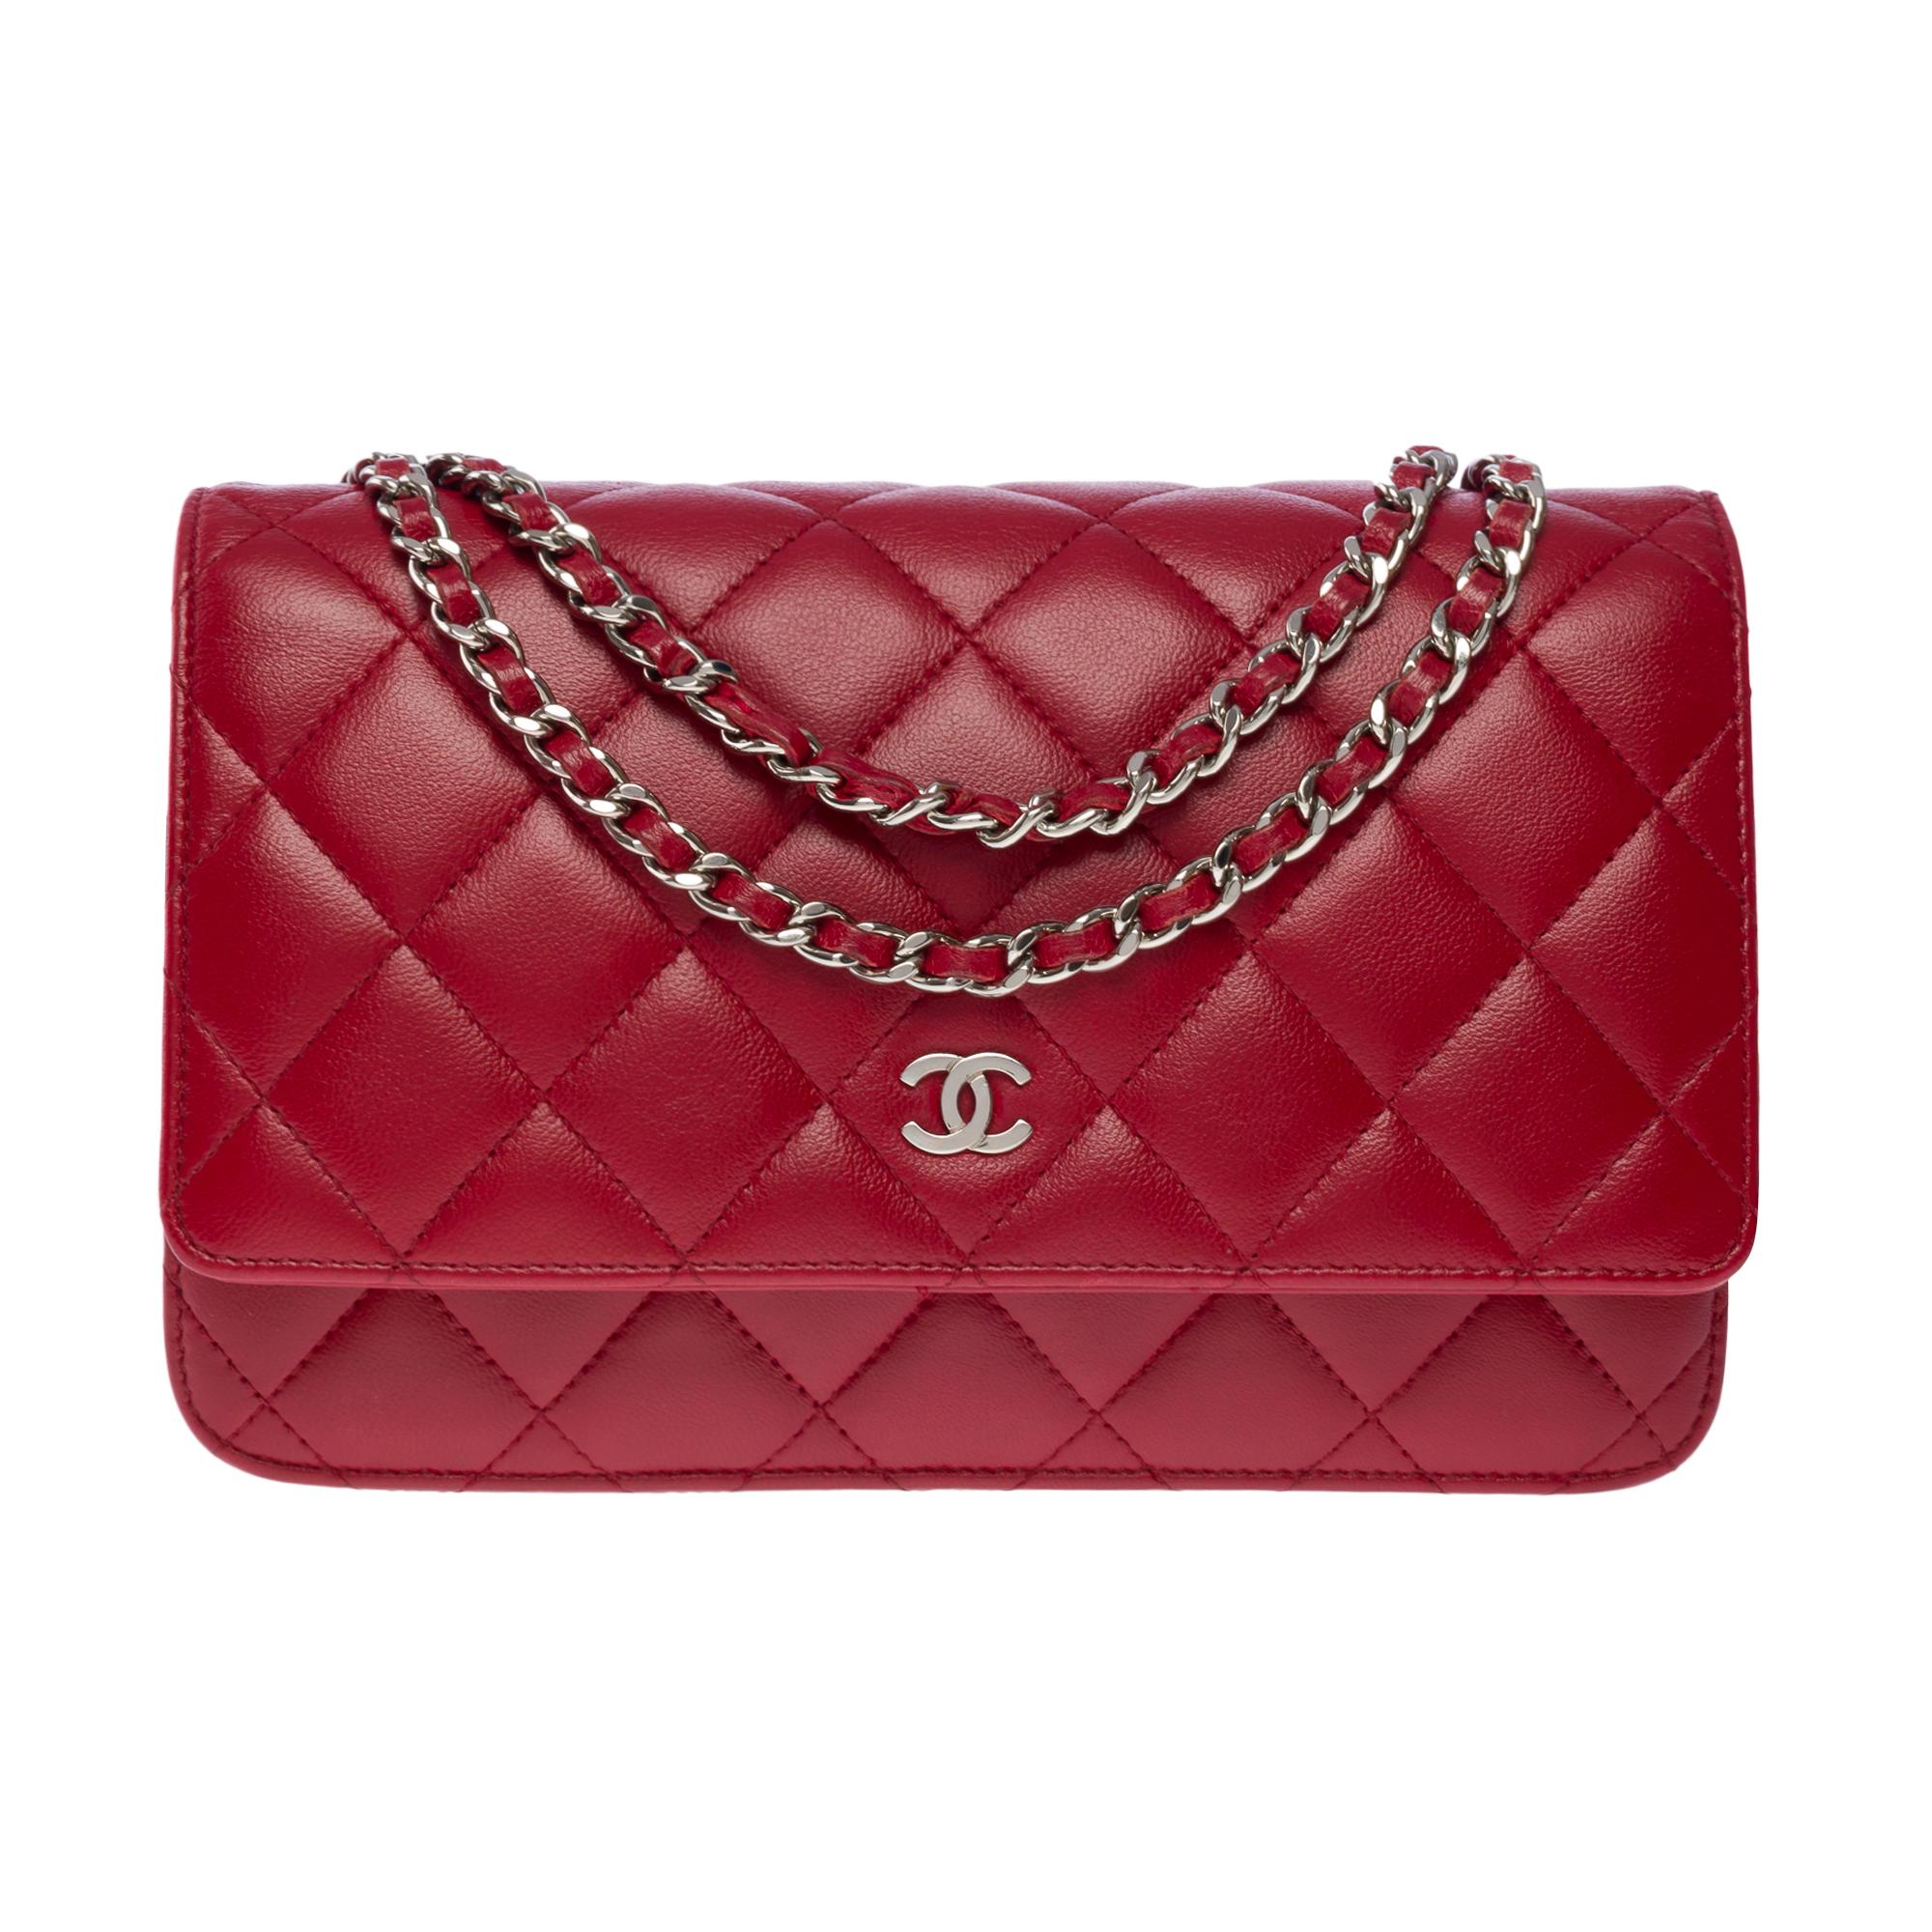 Lovely Chanel Wallet On Chain (WOC) shoulder bag in red quilted lambskin leather, silver metal hardware, a silver metal chain handle intertwined with red leather for a shoulder or crossbody carry
A patch pocket at the back of the bag
Closure by